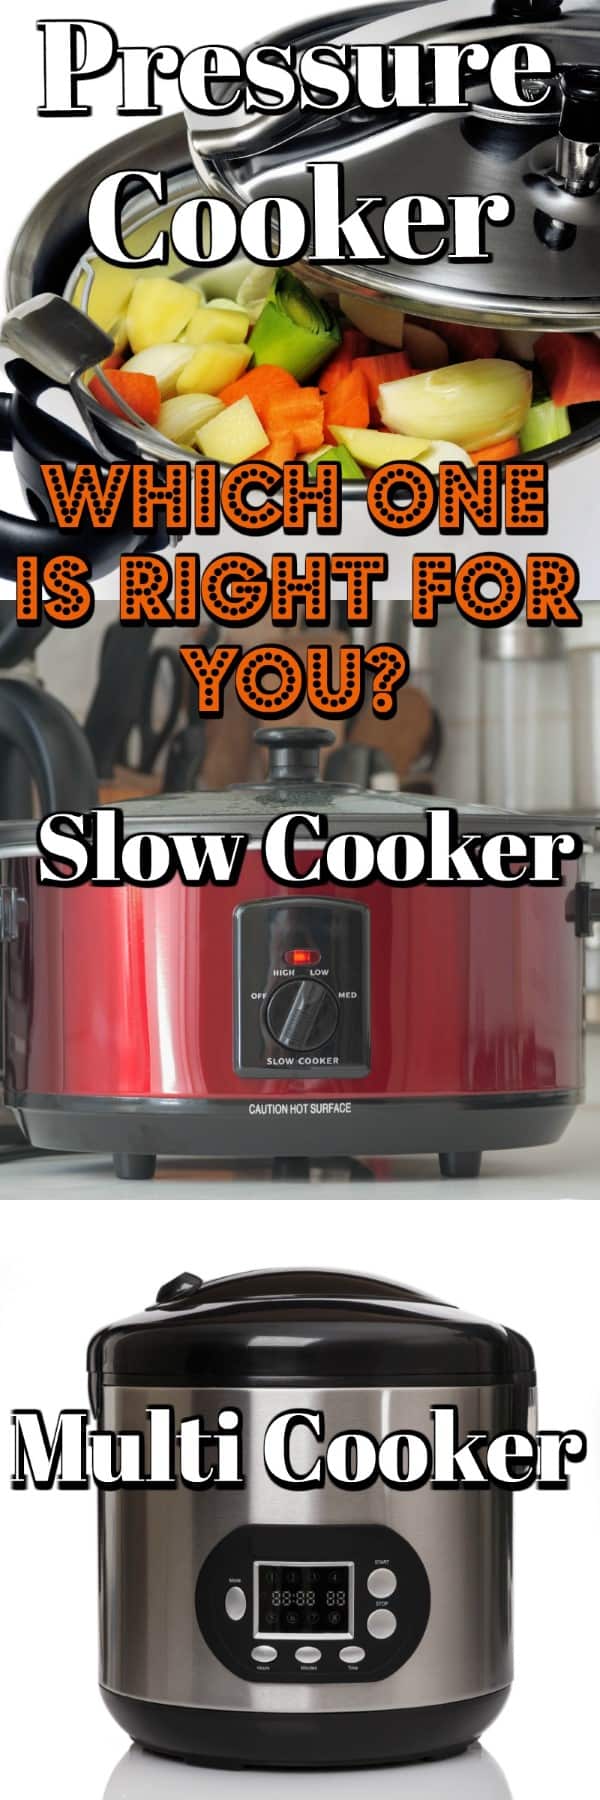 Pressure Cooker vs Slow Cooker vs Multi Cooker (Plus an Air Fryer). Which one is right for you? #multicooker #pressurecooker #slowcooker